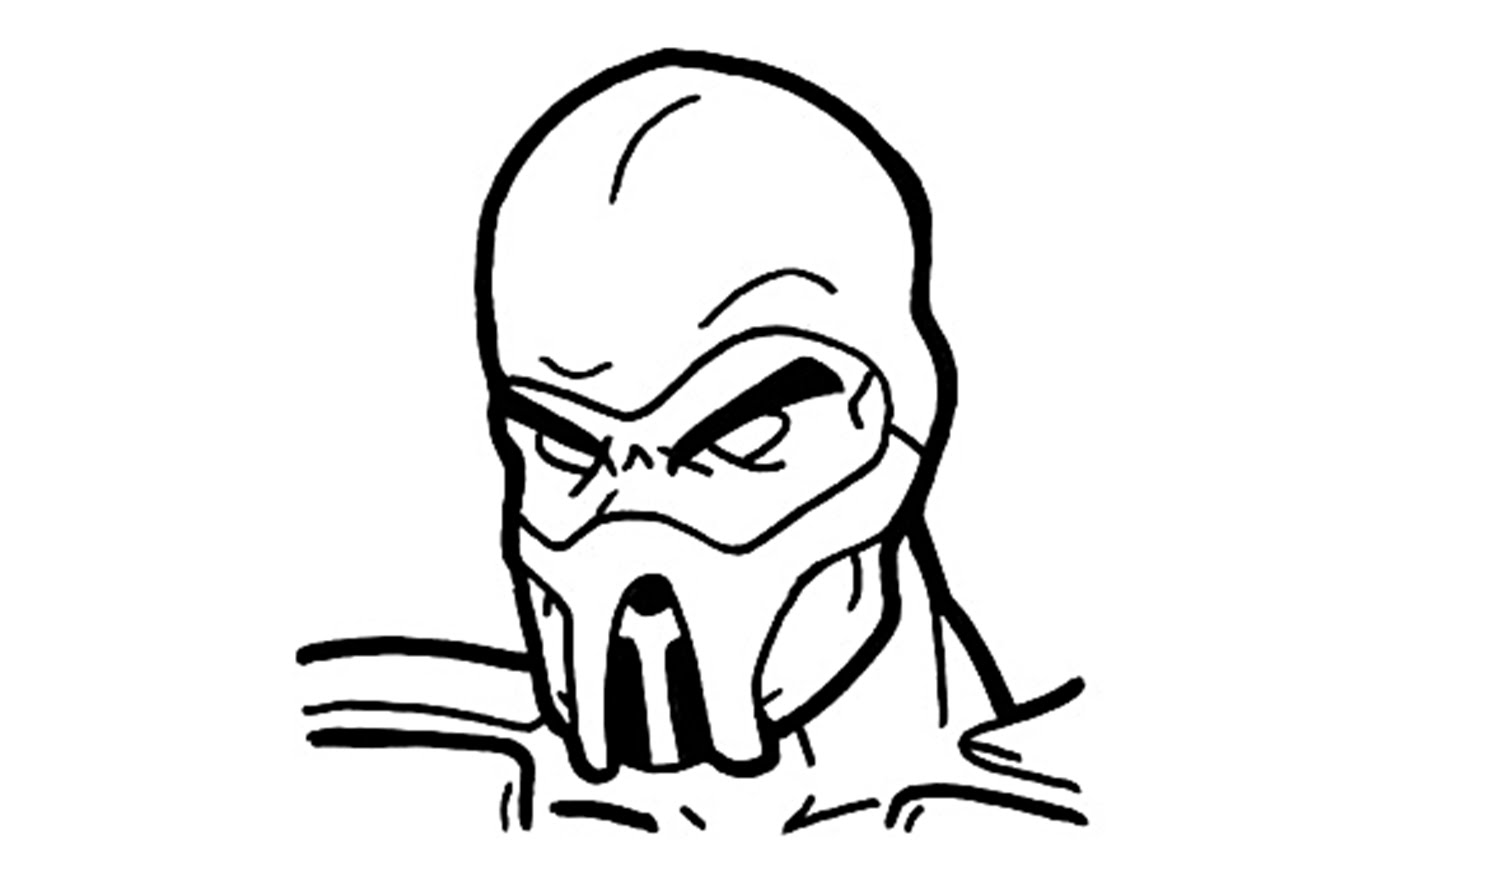 How to Draw Scorpion from Mortal Kombat - YouTube